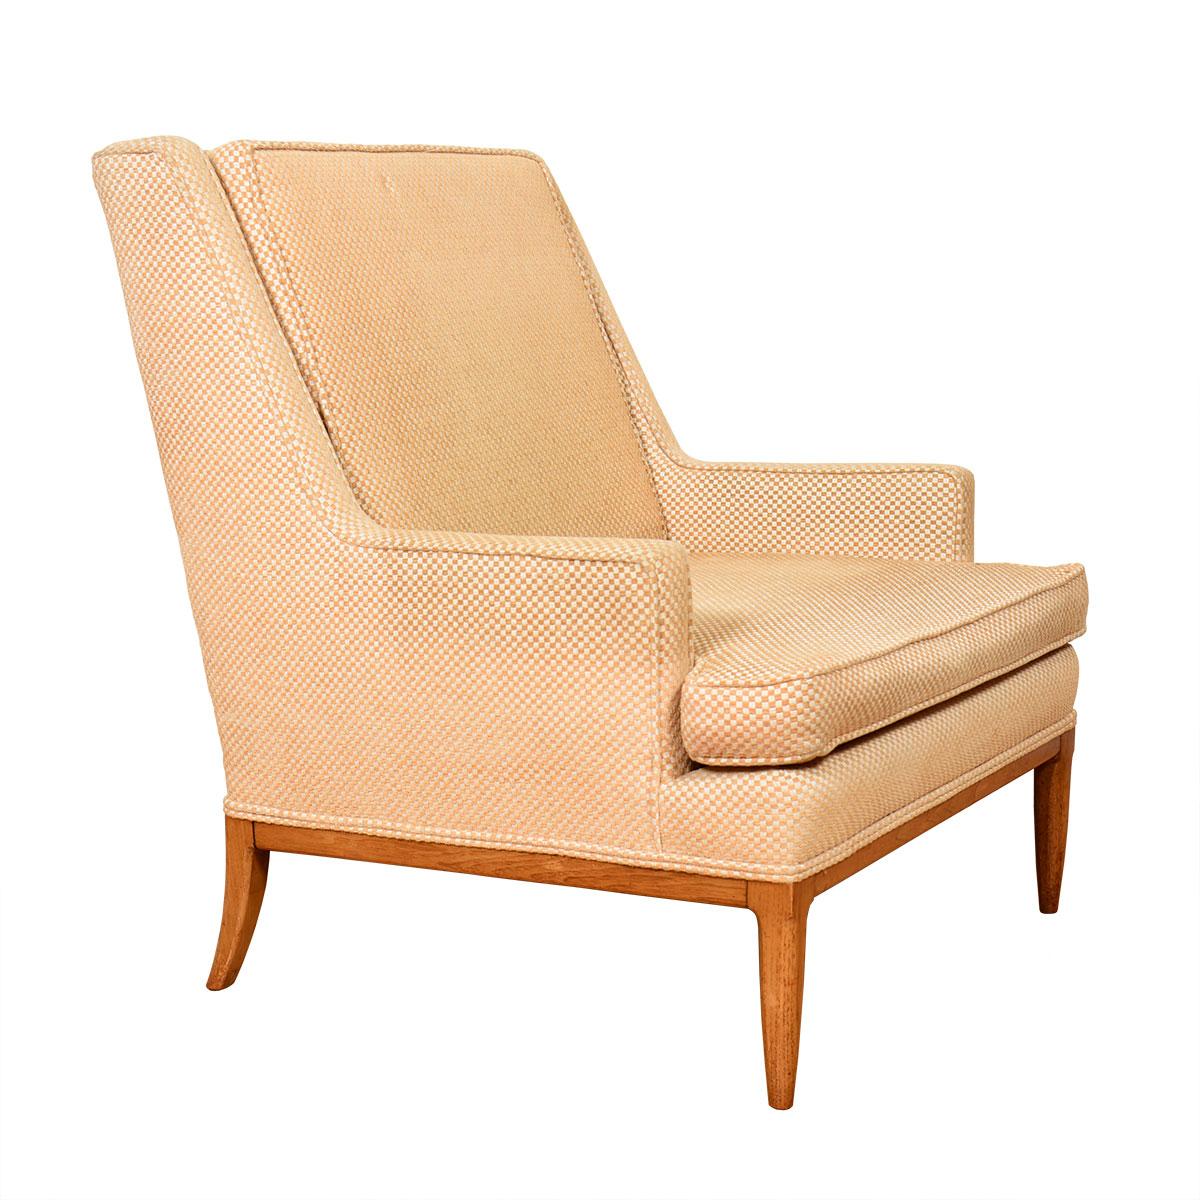 Mid-Century Modern Paul McCobb Style Midcentury Upholstered Club Chair For Sale